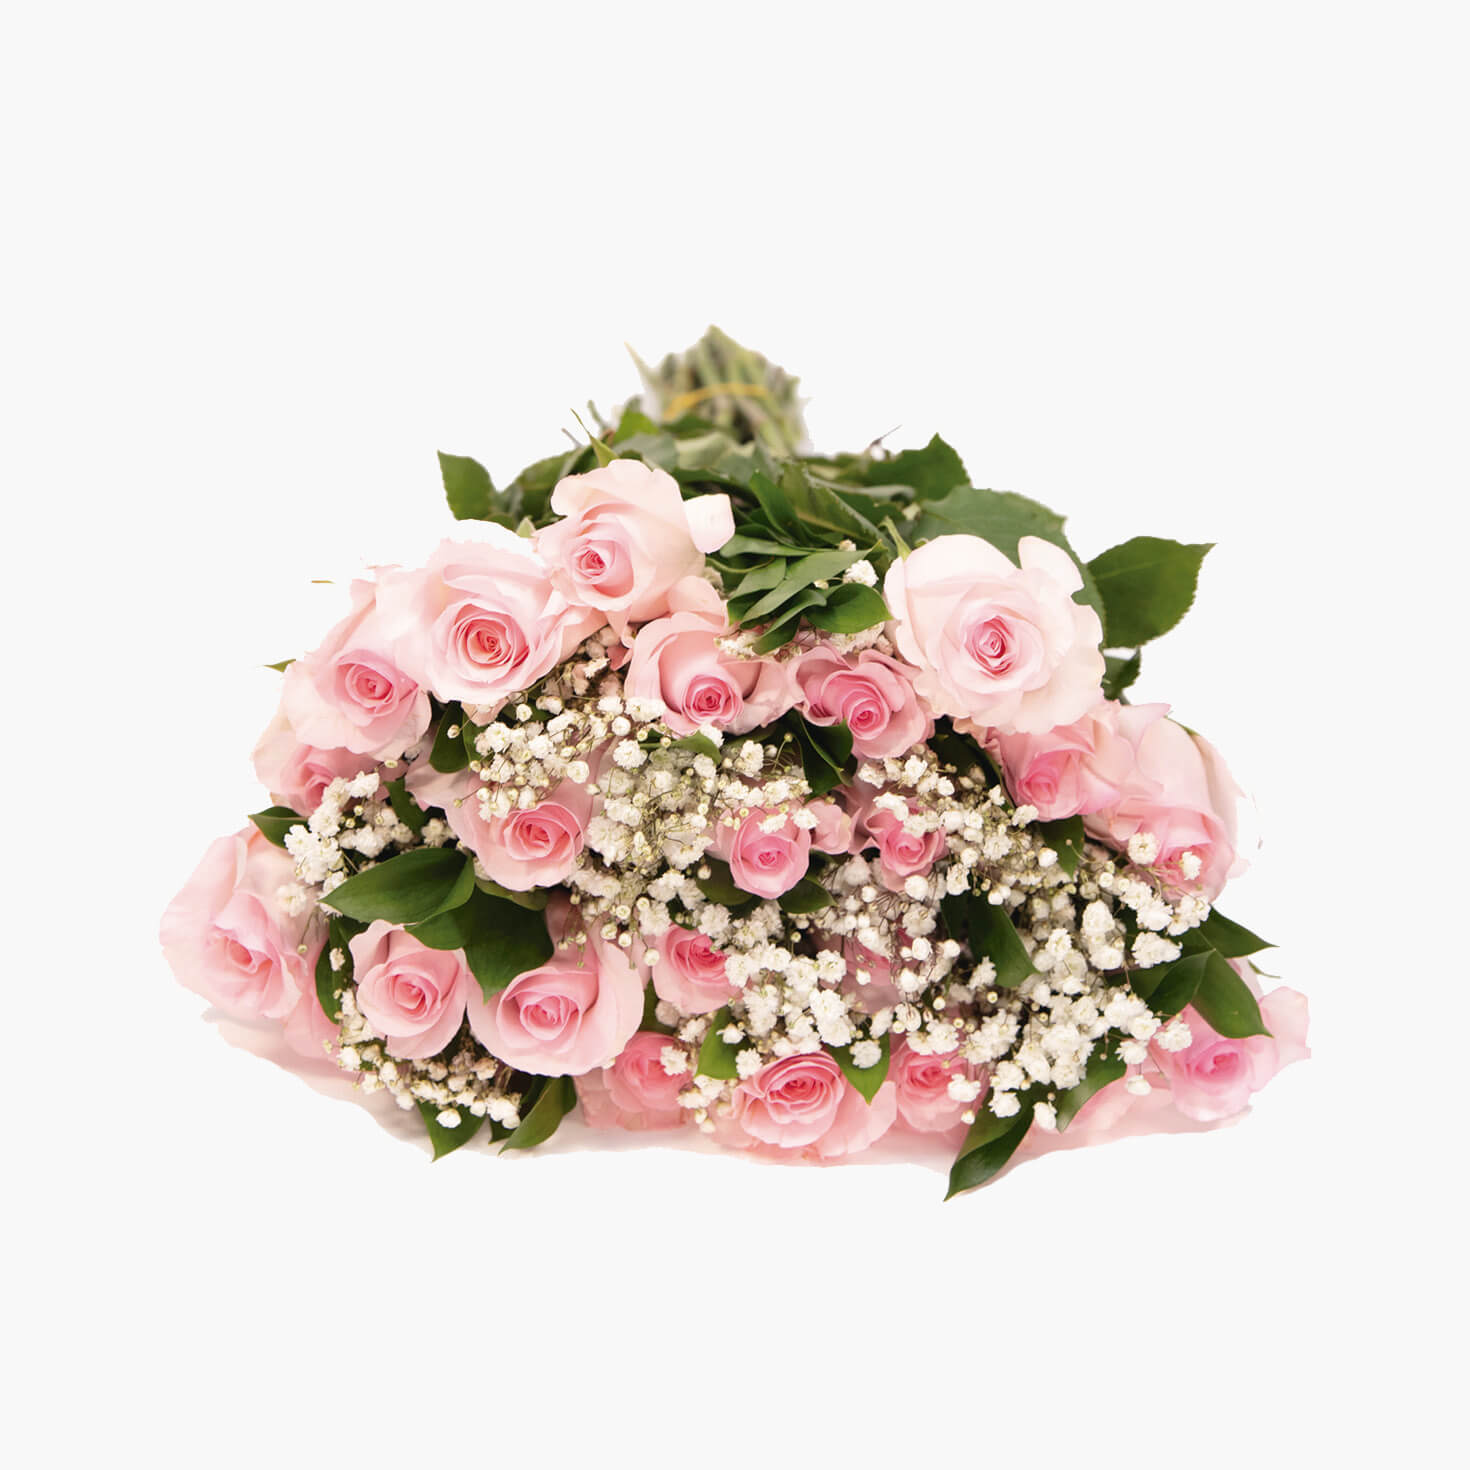 Bouquet with 24 Pink Roses, Baby's Breath and Greenery